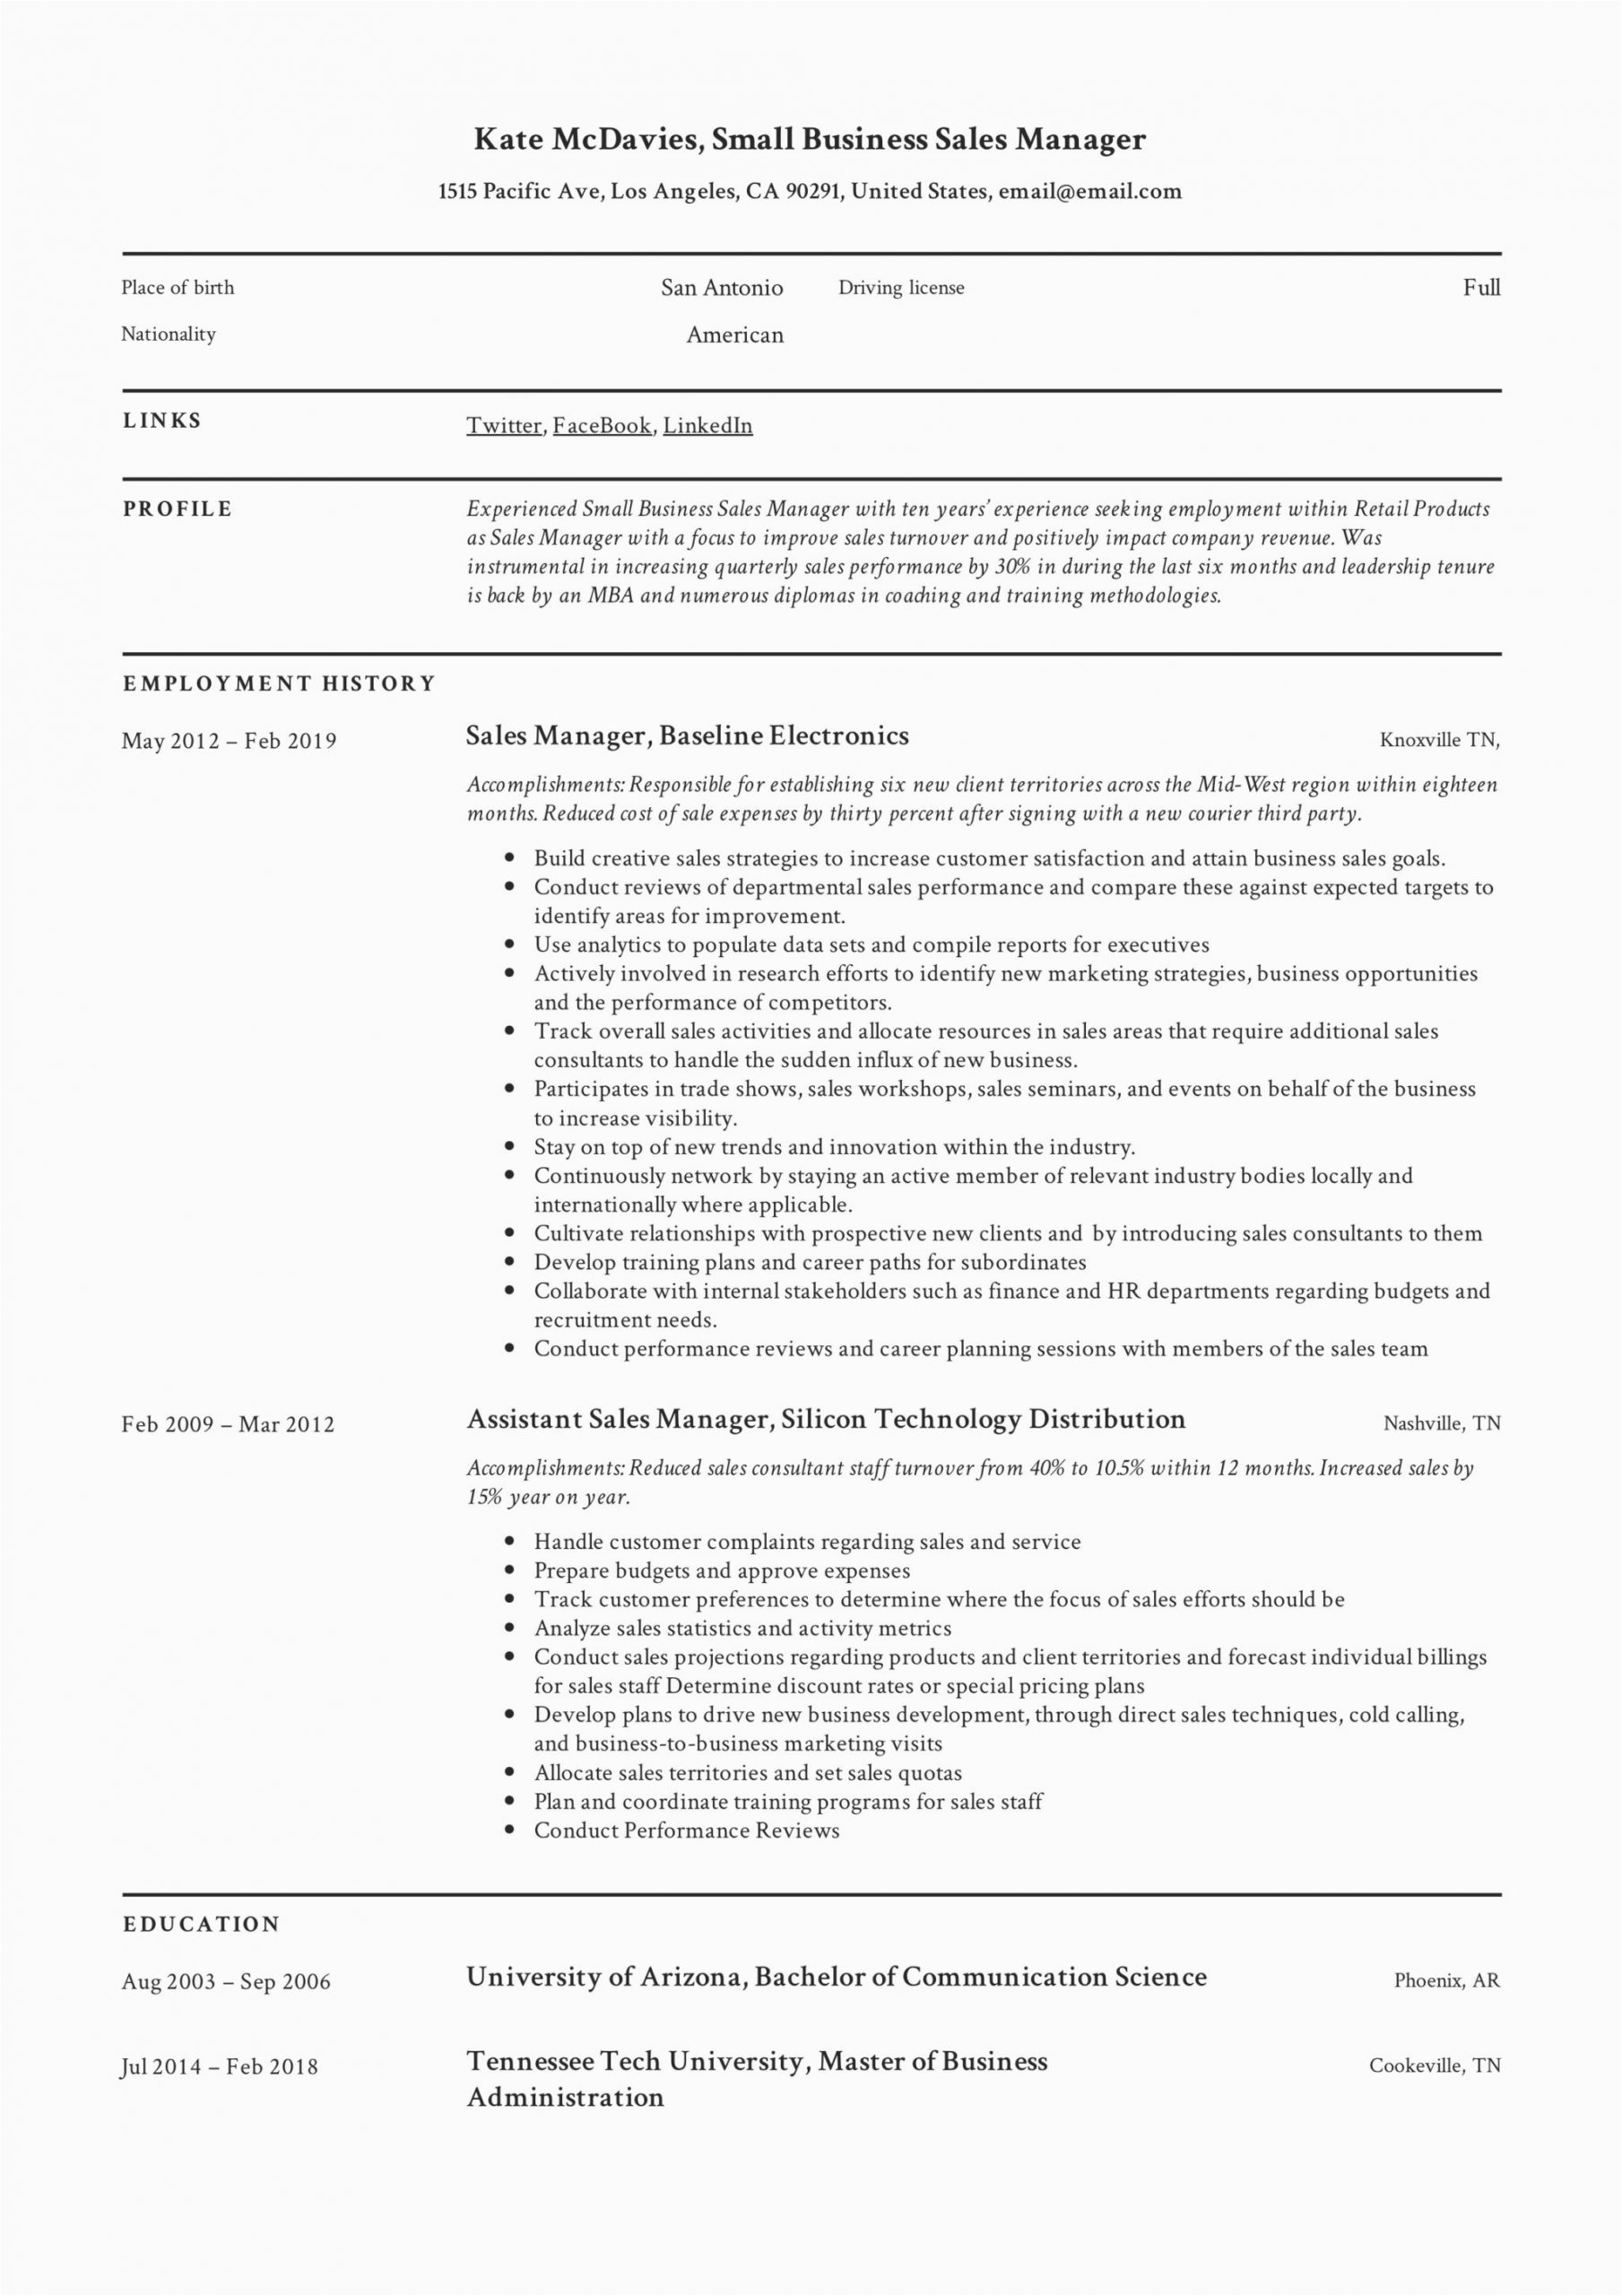 Sample Resume for Sales Manager Position Guide Small Business Sales Manager Resume [x12] Sample